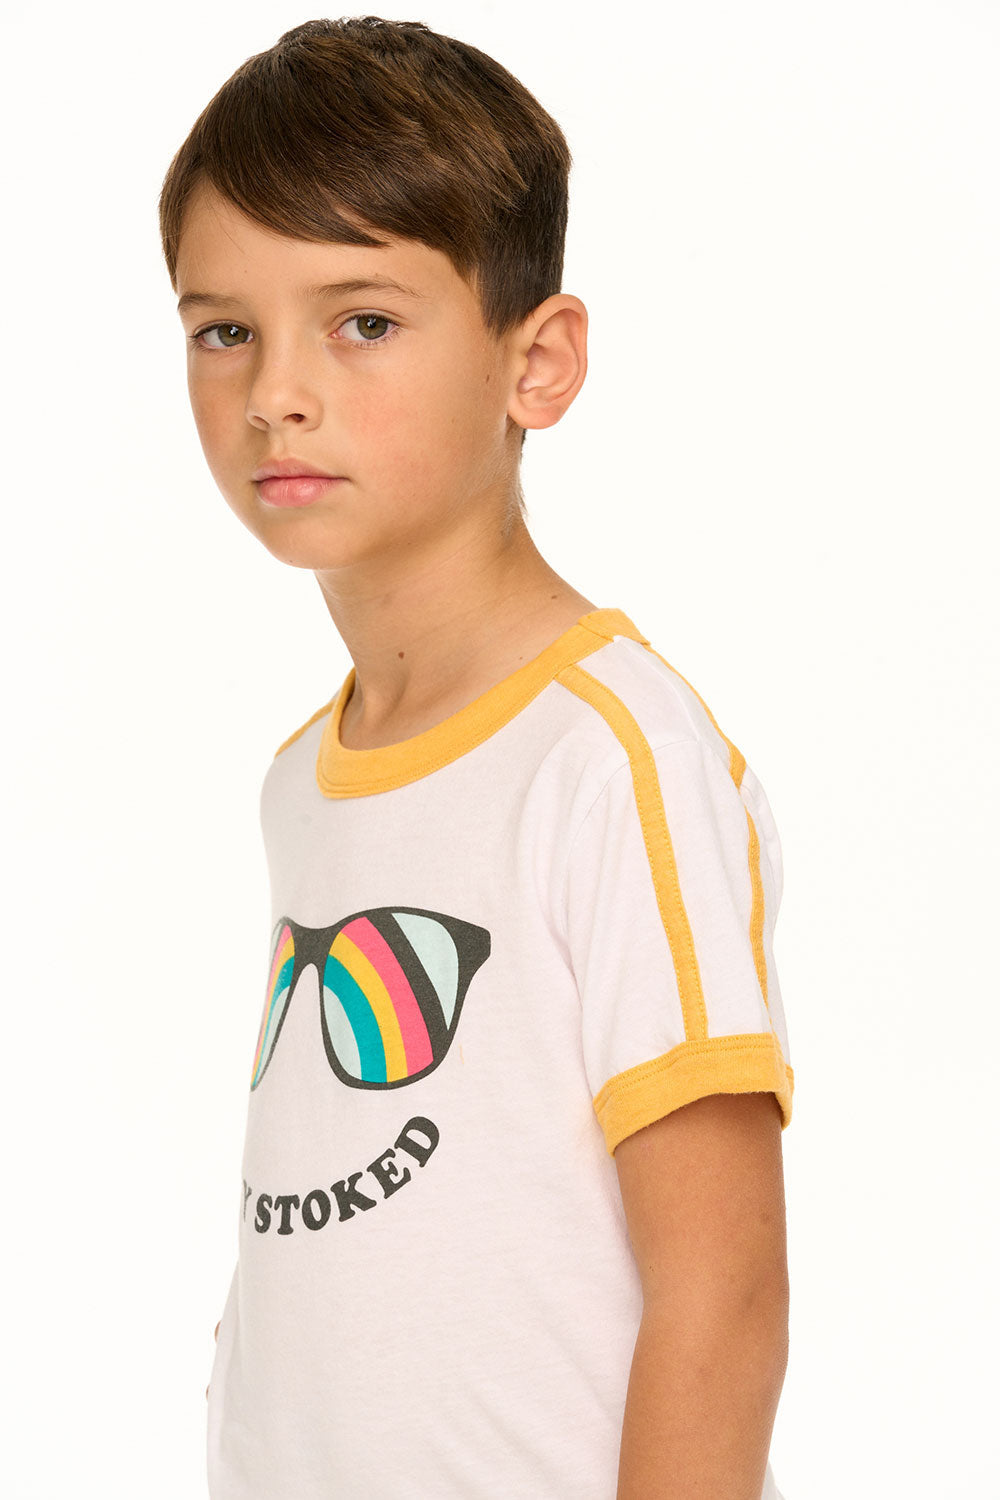 Stay Stoked Toddler Tee